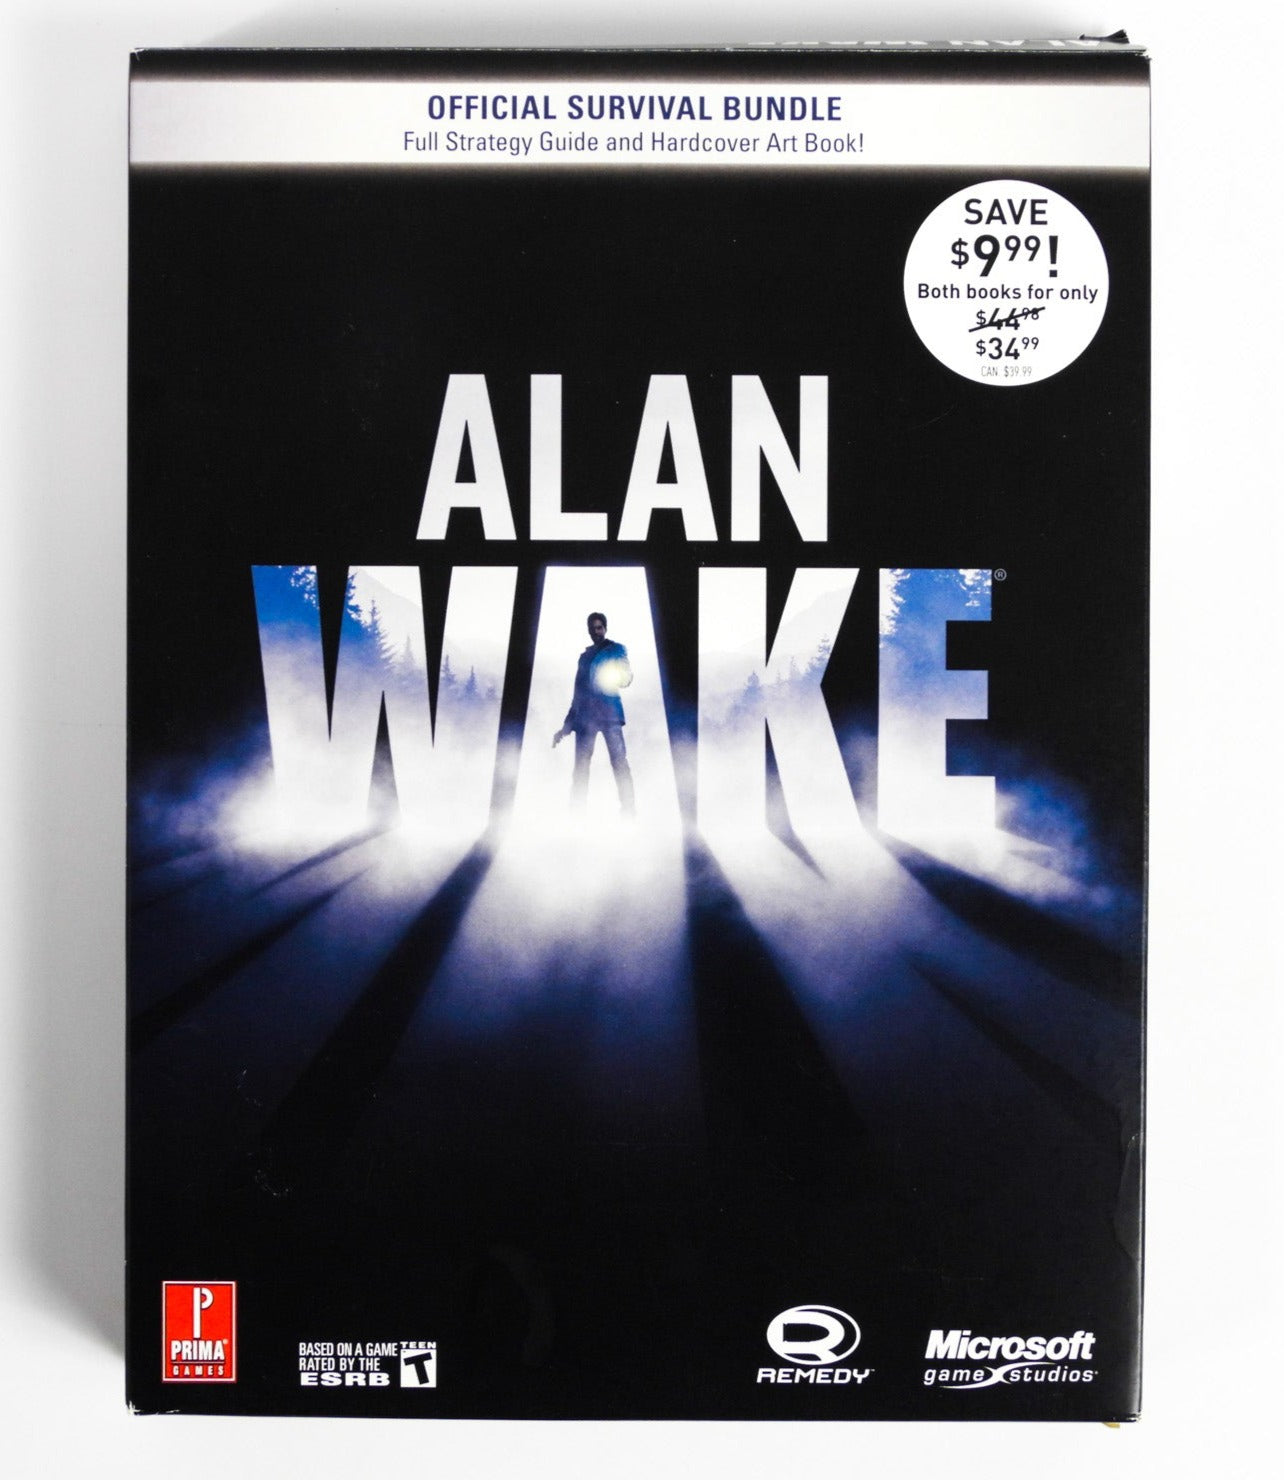 Is Alan Wake 2 Coming to PS4 and Xbox One? - Answered - Prima Games